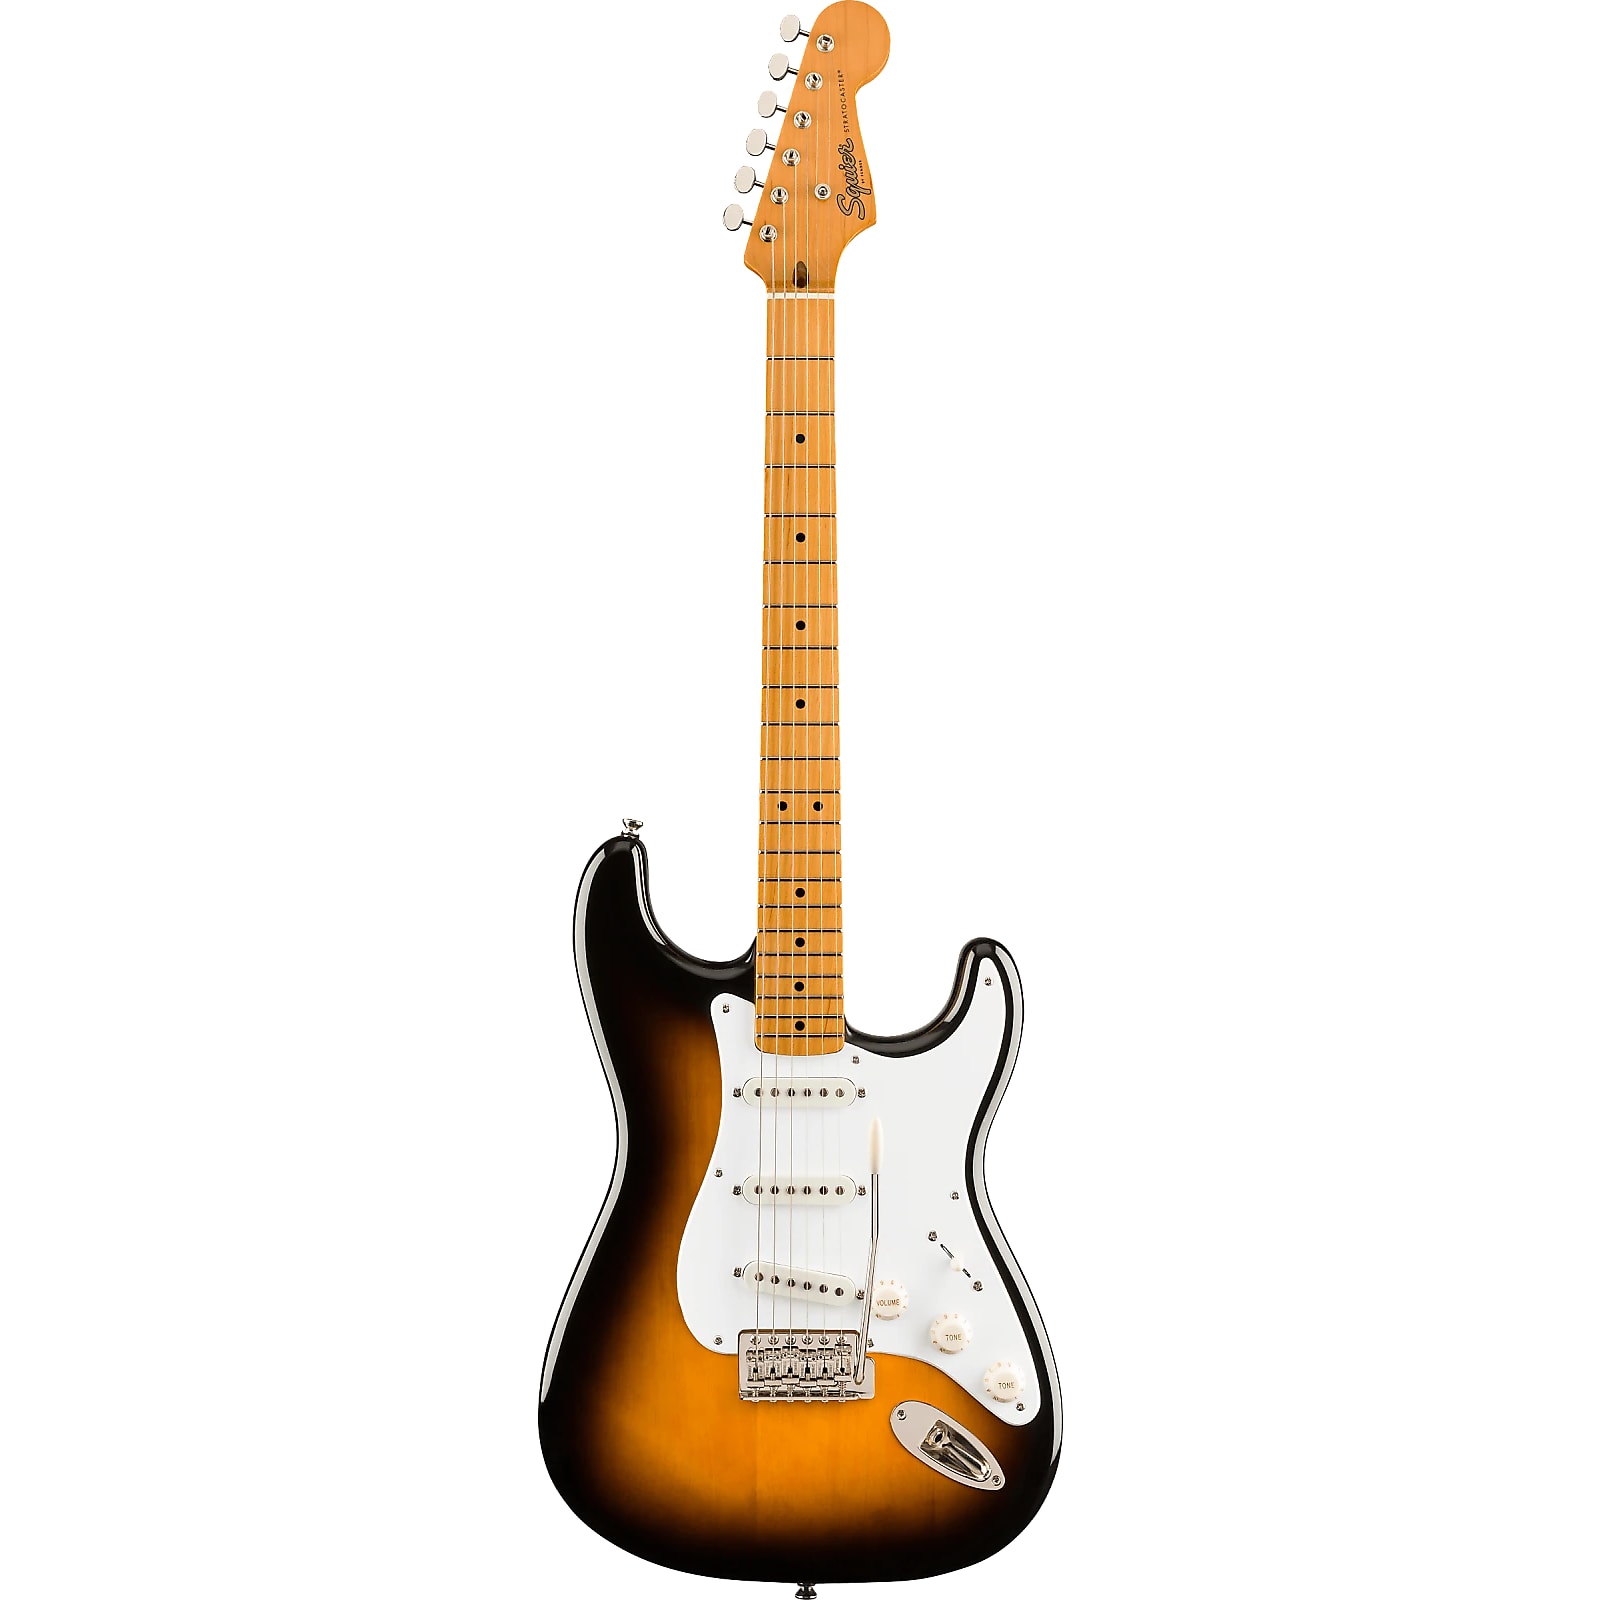 Squier Classic Vibe Stratocaster '50s 2009 - 2018 | Reverb